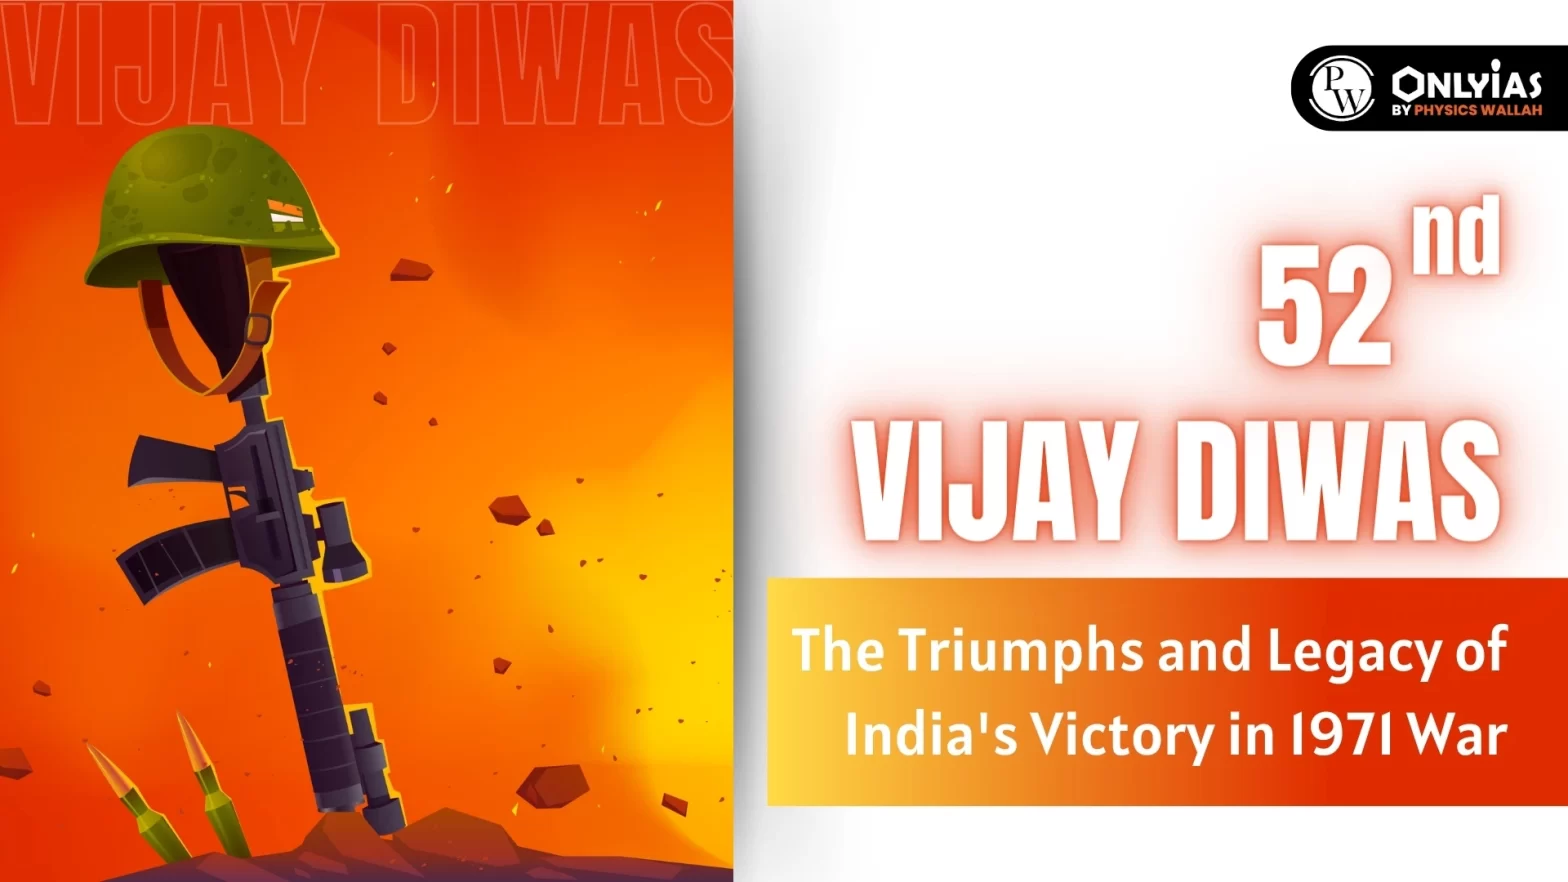 52nd Vijay Diwas: The Triumphs and Legacy of India’s Victory in 1971 War